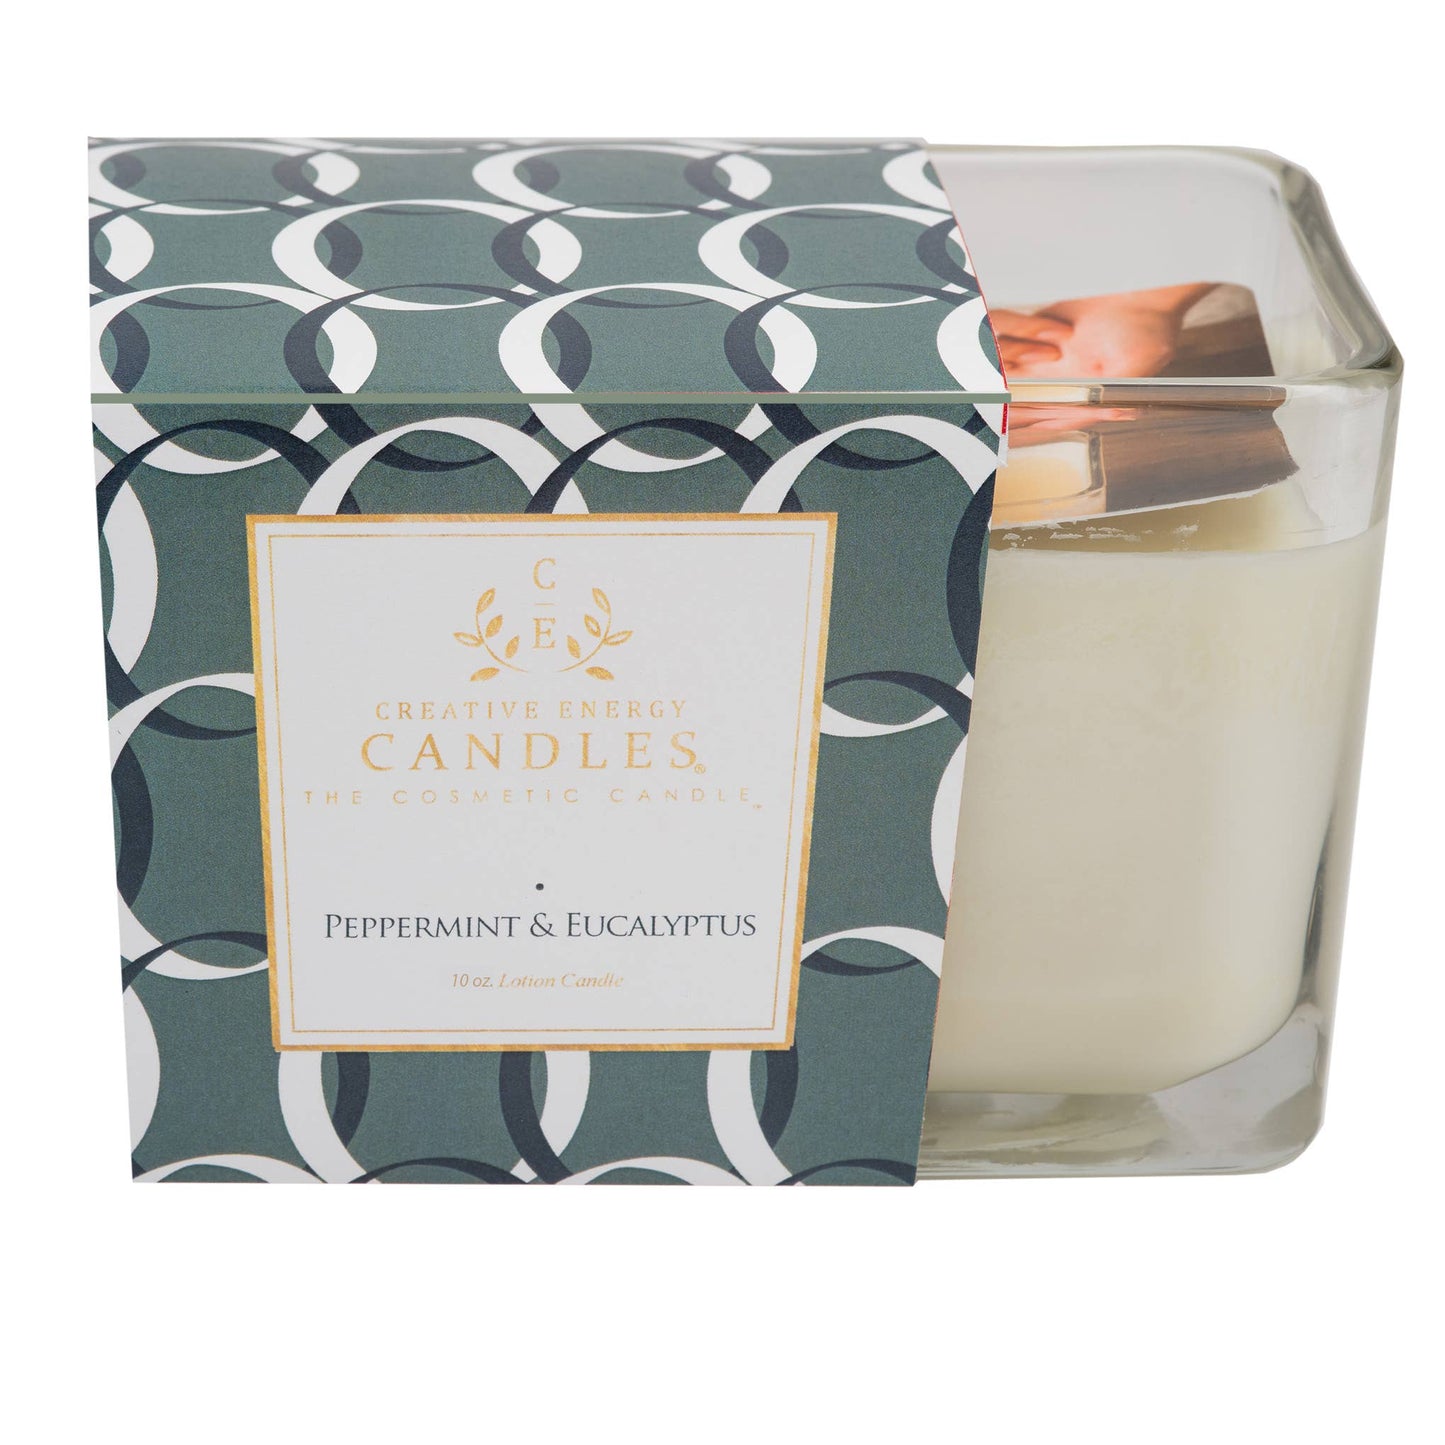 Peppermint & Eucalyptus: 2-in-1 Soy Lotion Candle 10oz